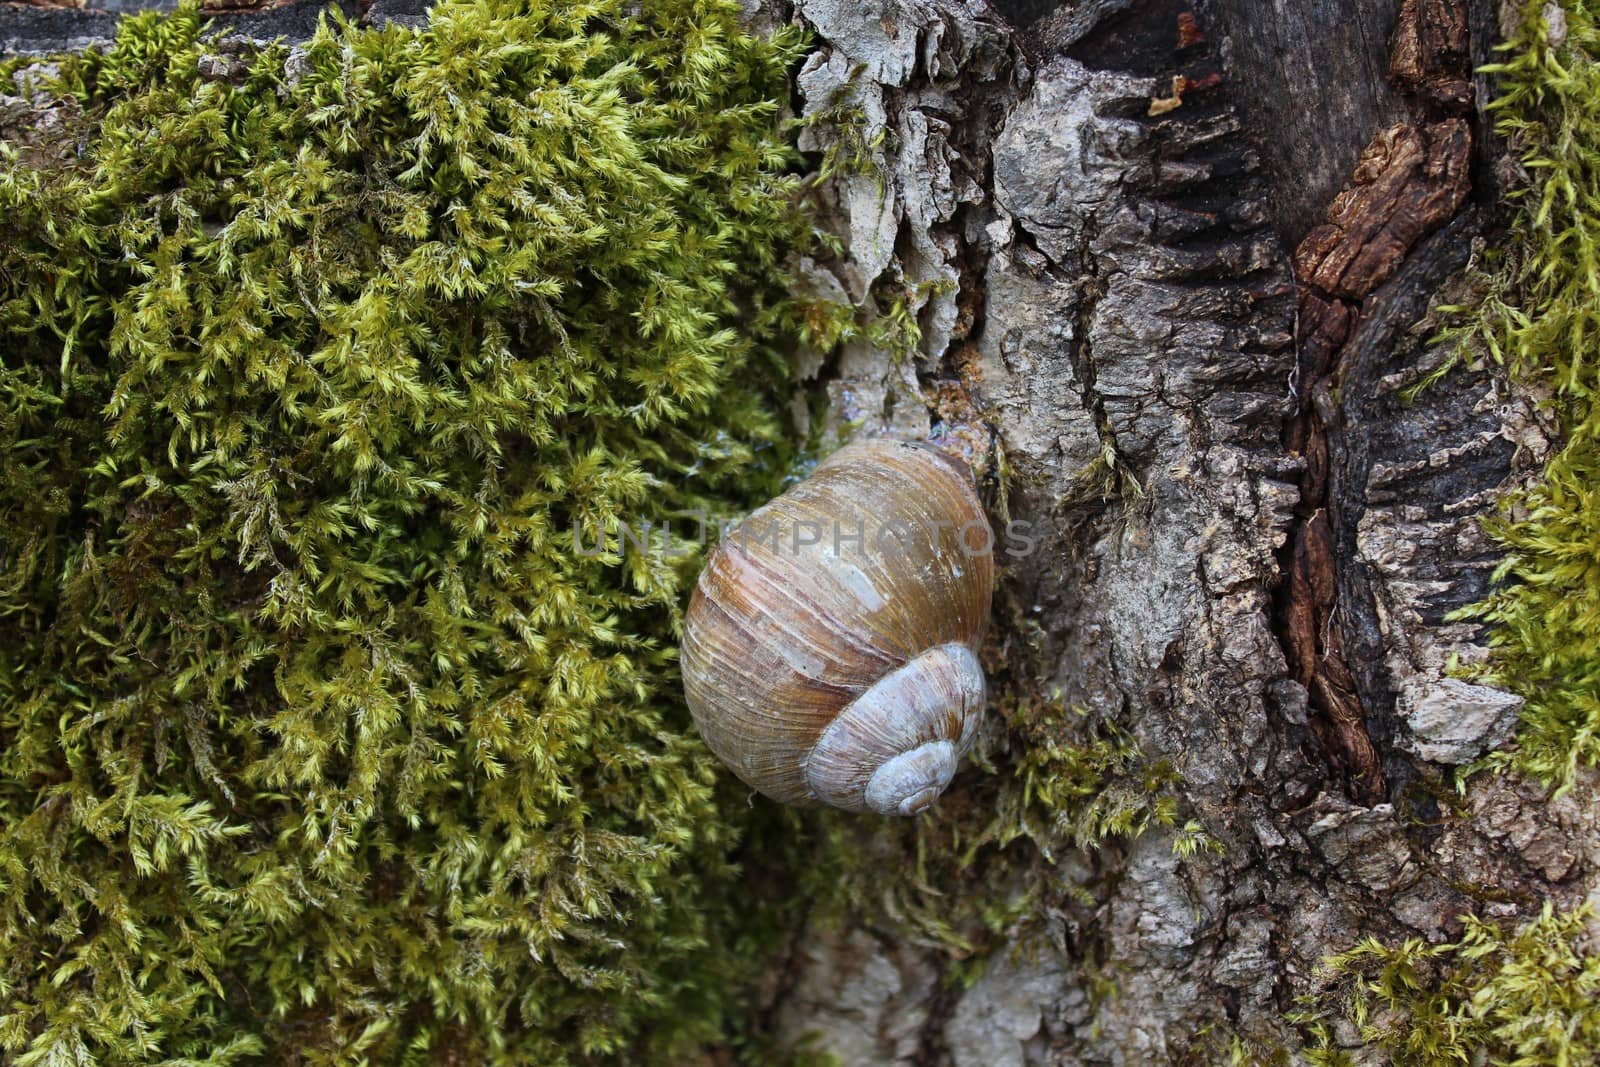 The picture shows a vineyard snail on a tree